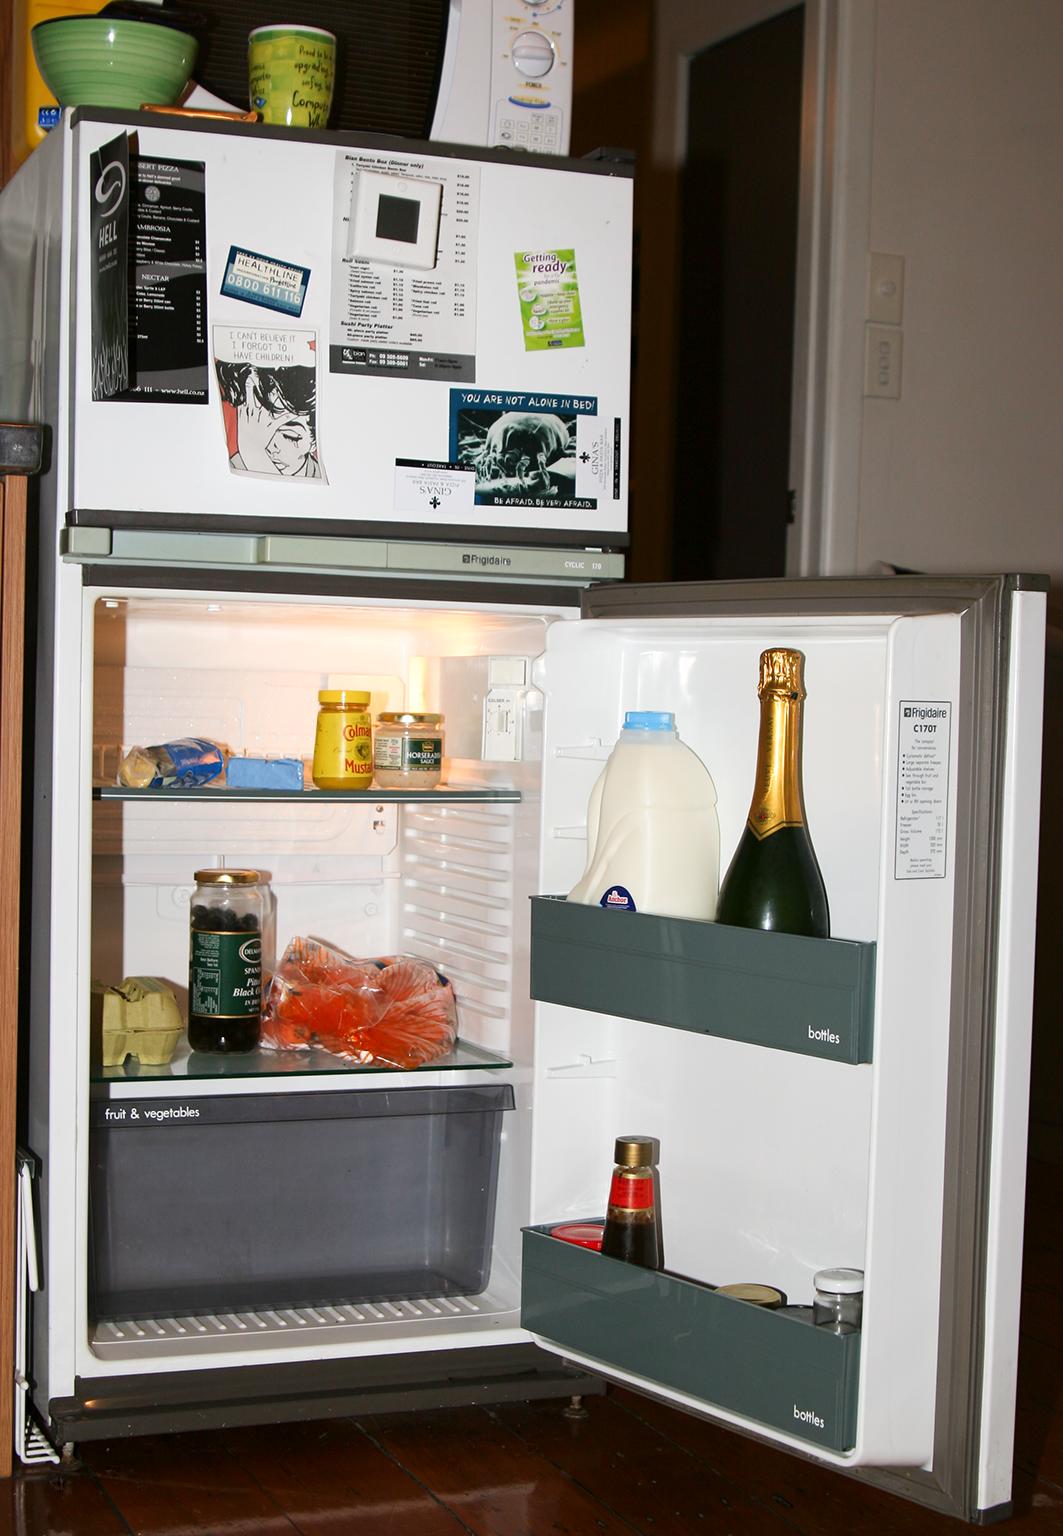 a fridge is open with some bottles and beverages inside